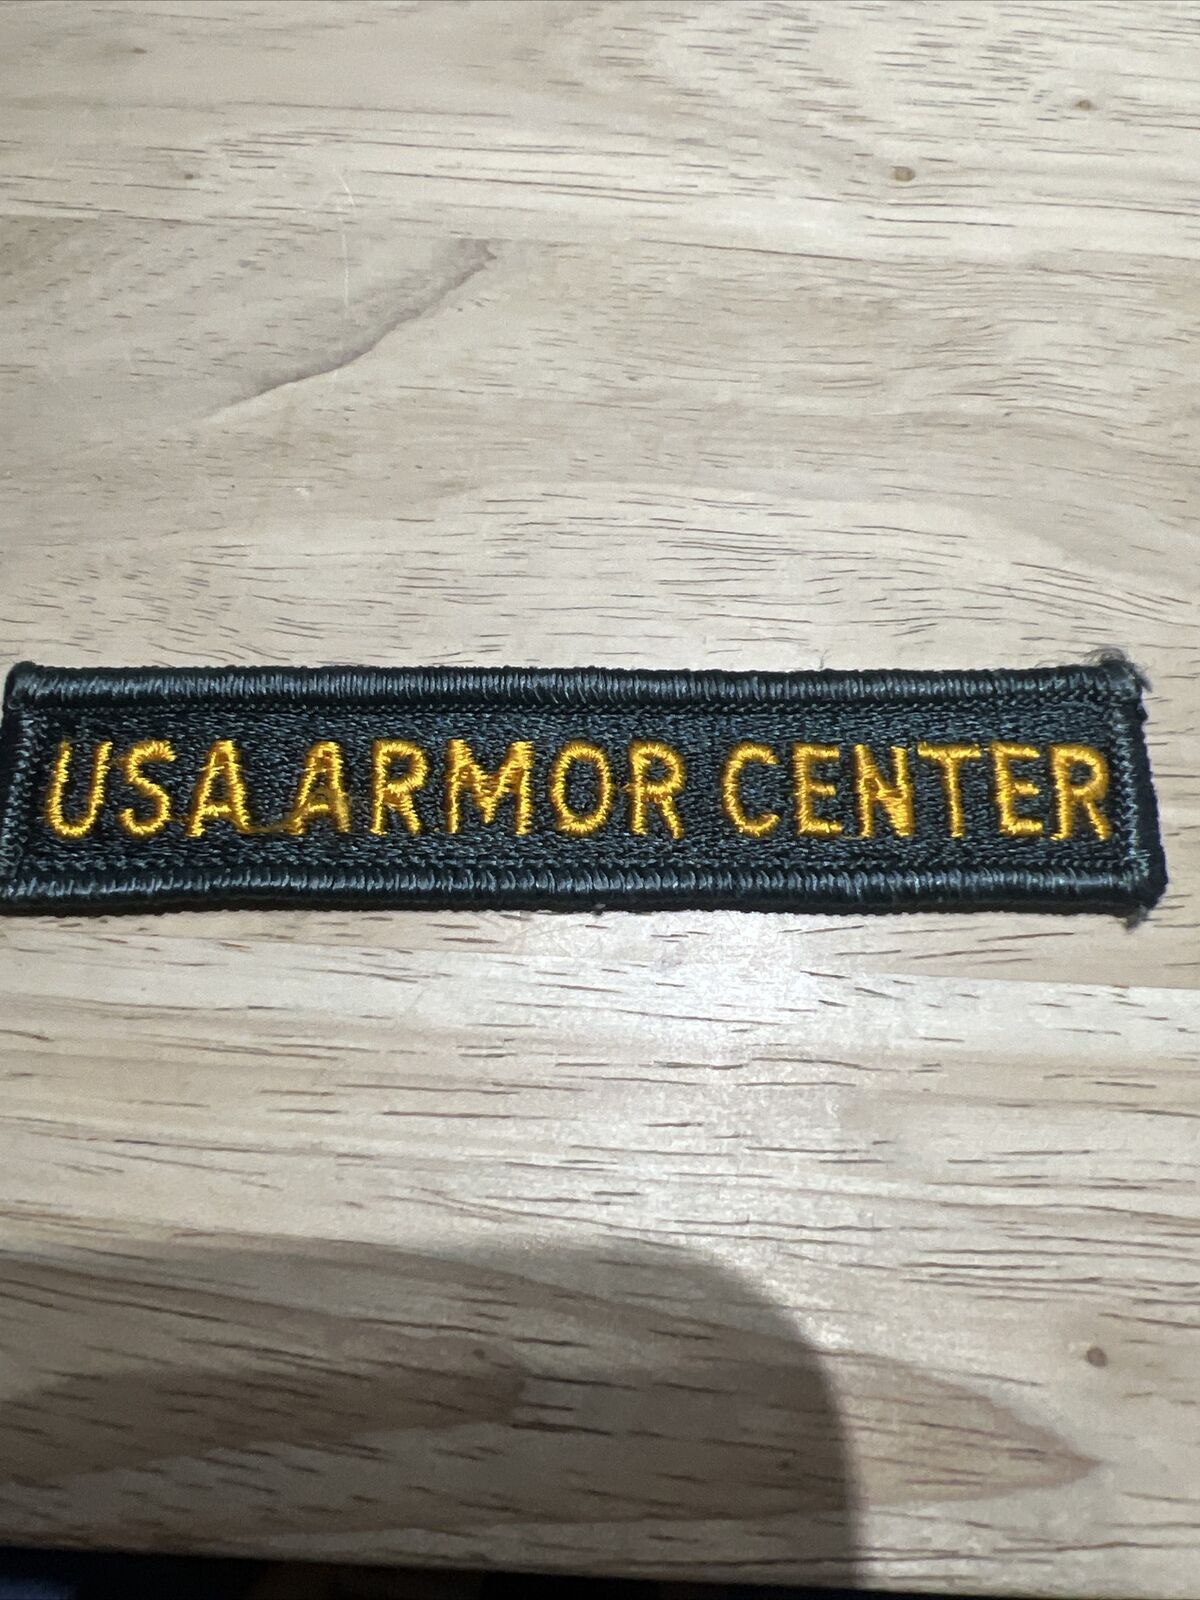 Vietnam Cold War Era US Army USA ARMOR CENTER Tab or Patch